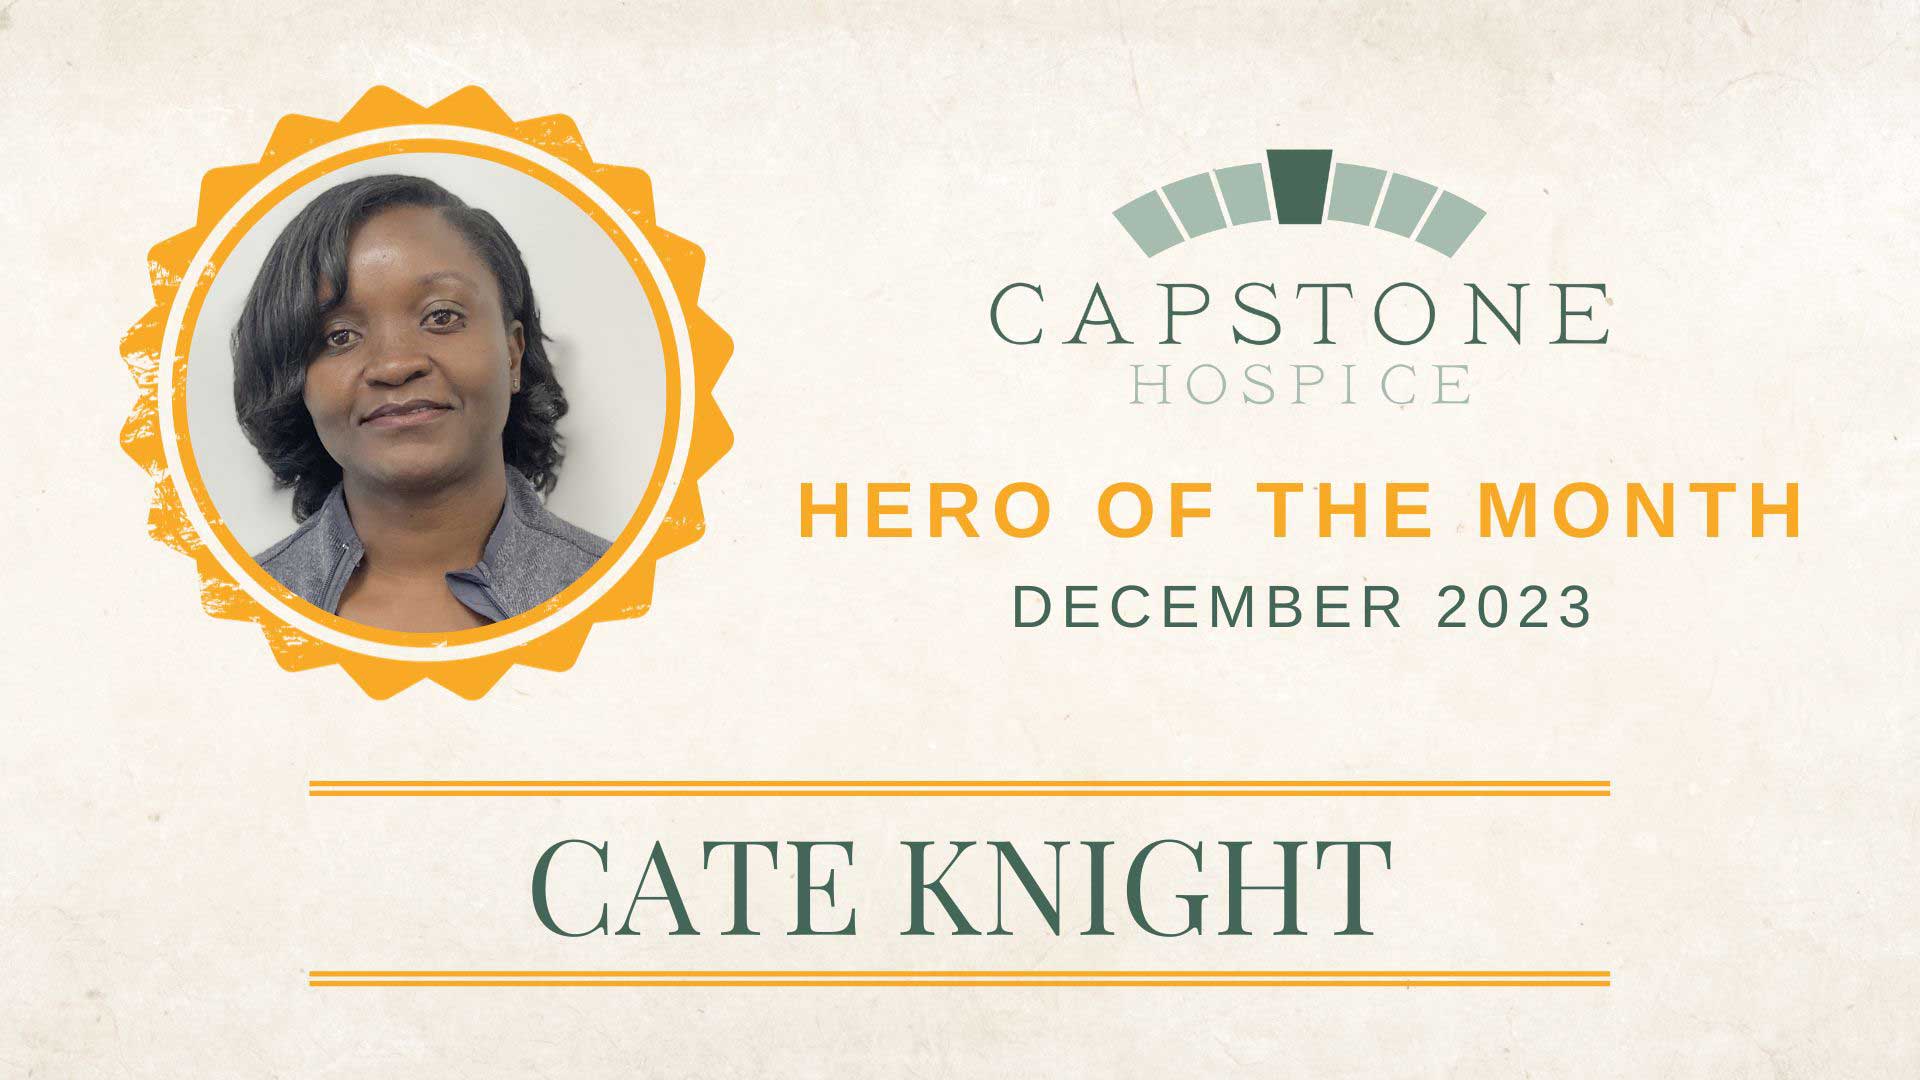 Cate Knight — December 2023 Hero of the Month